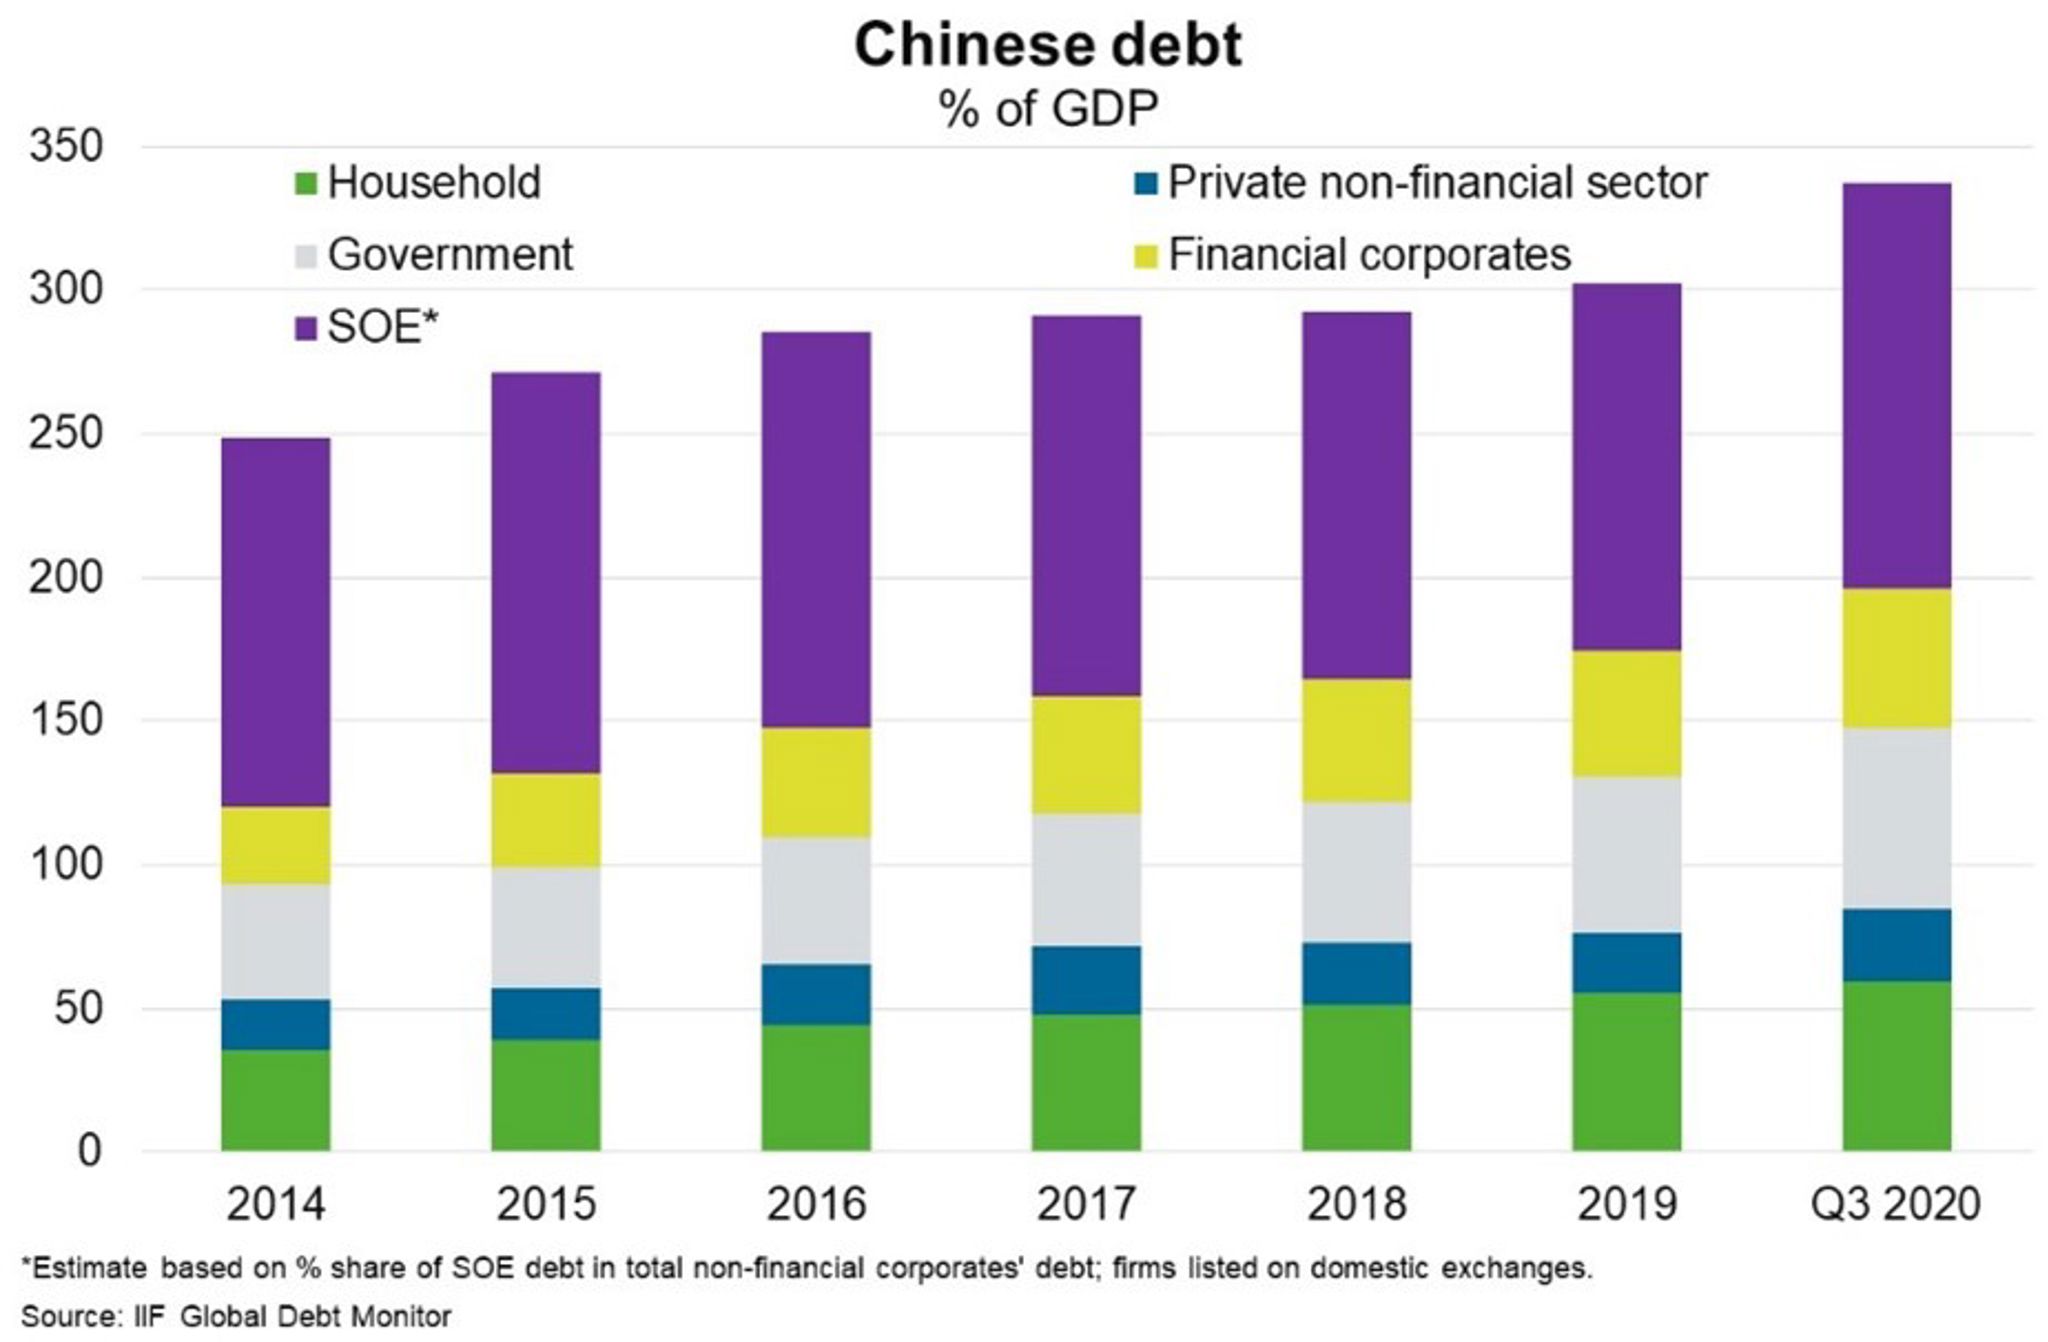 China—Five-year plan highlights domestic goals, but risks higher debt